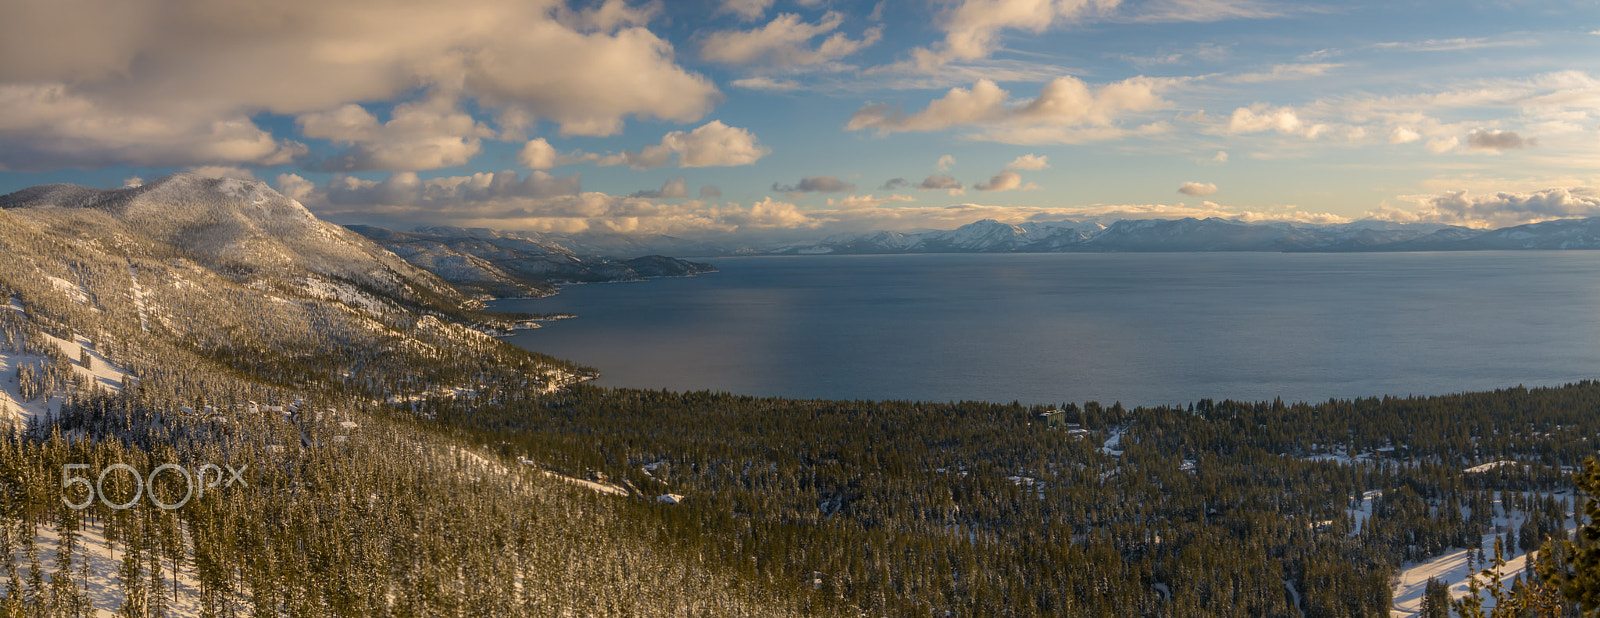 Nikon D7100 sample photo. Pano from mt. rose photography